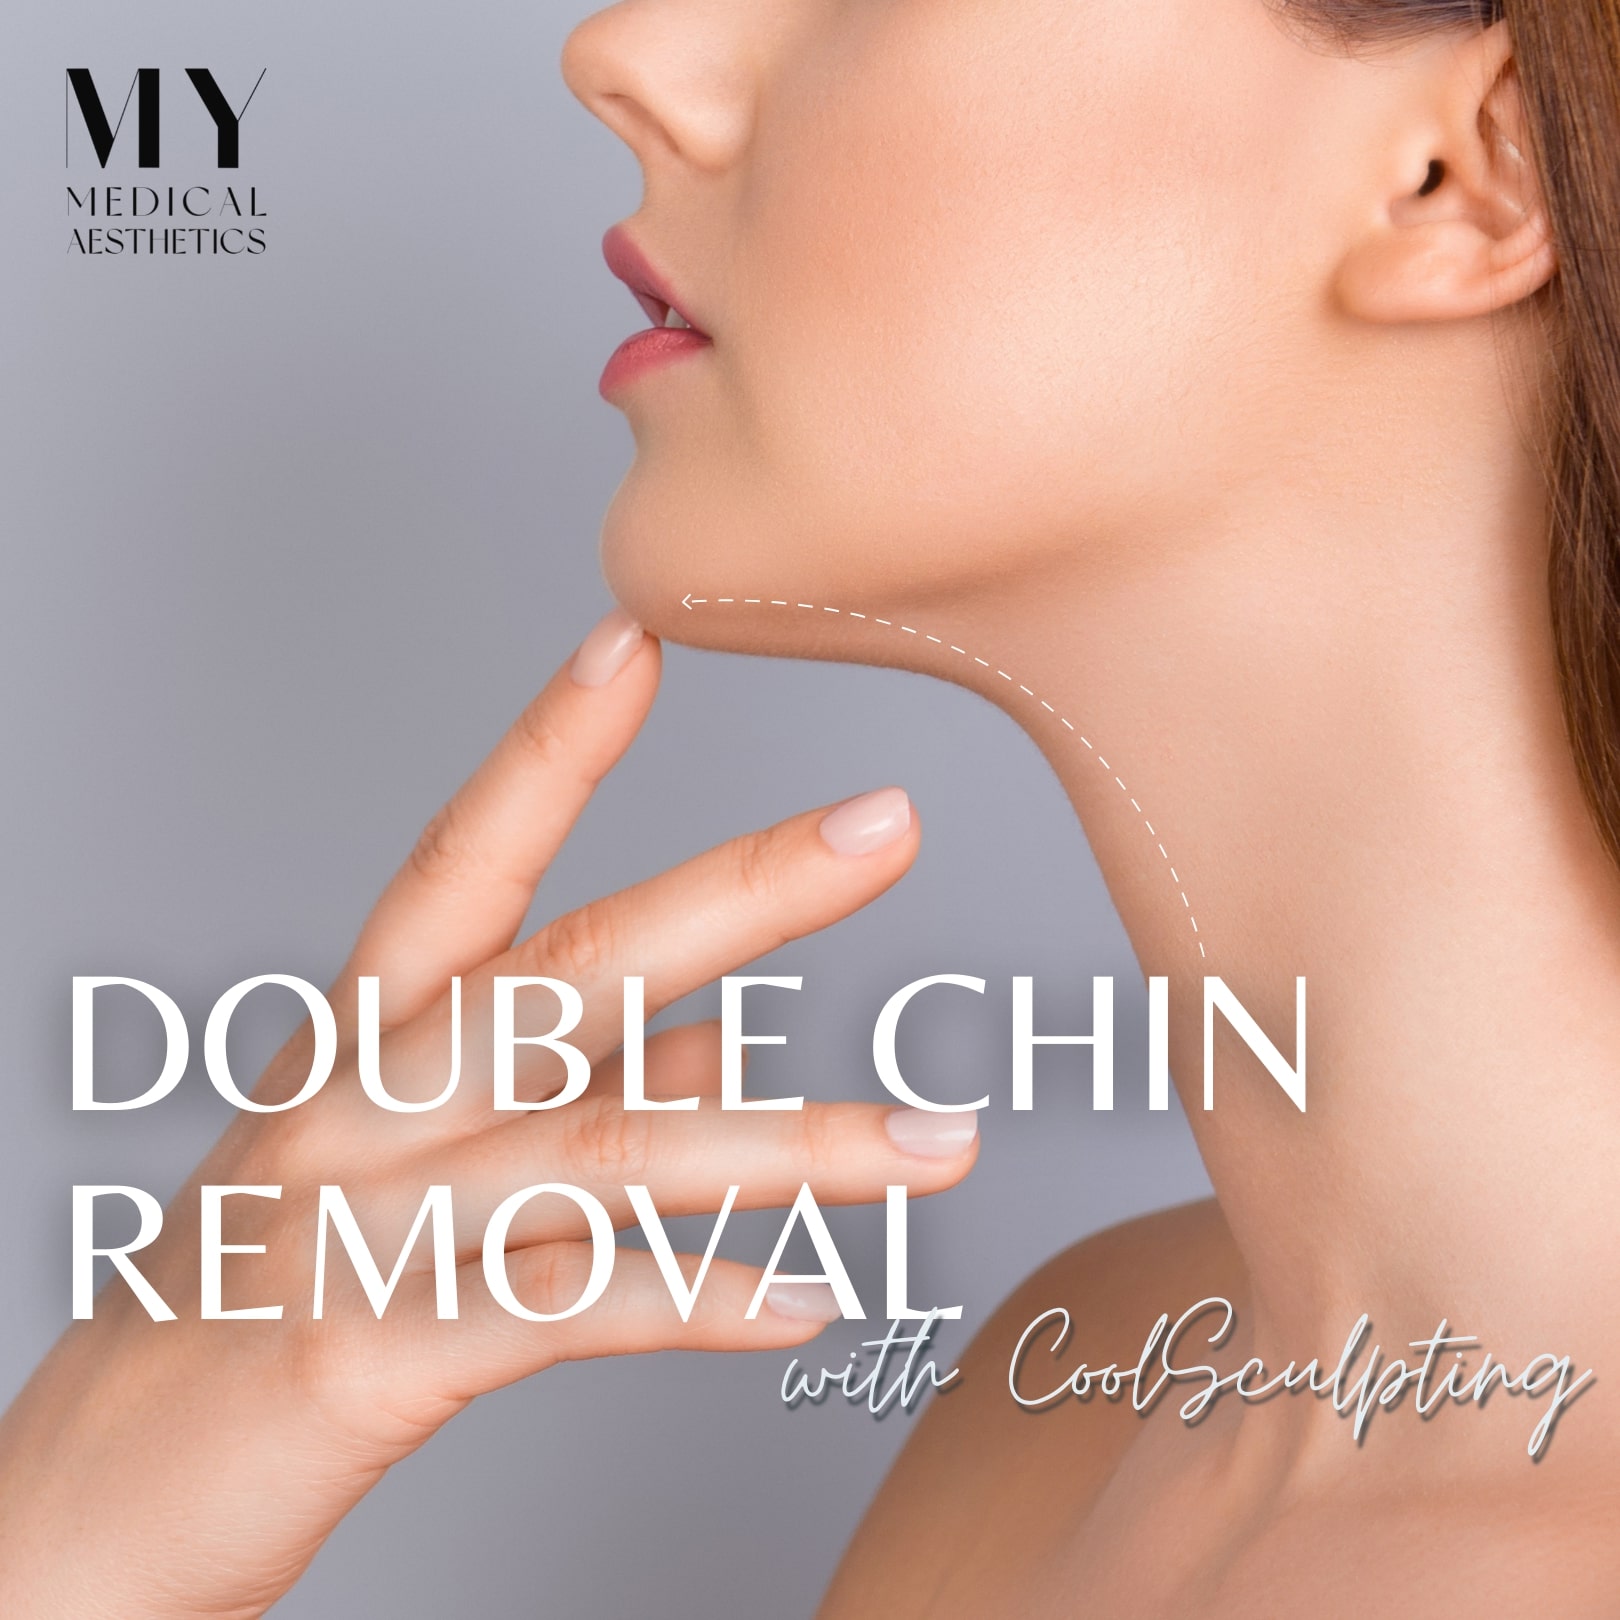 My Medical Aesthetic Double Chin Removal